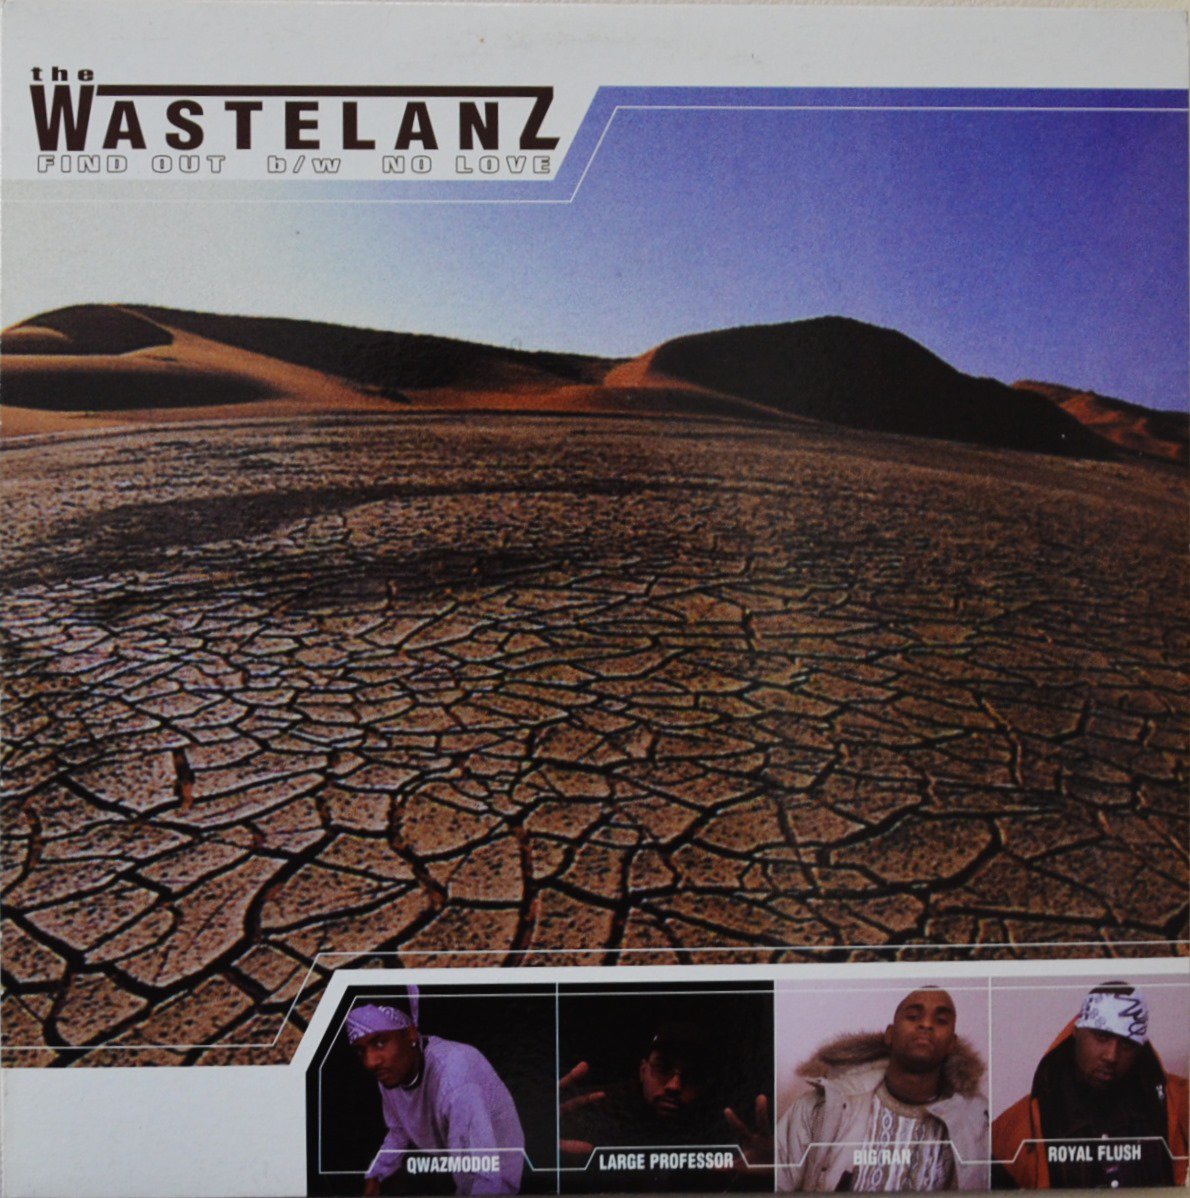 THE WASTELANZ / FIND OUT (PROD BY LARGE PROFESSOR) / NO LOVE (FT. ROYAL FLUSH) (12